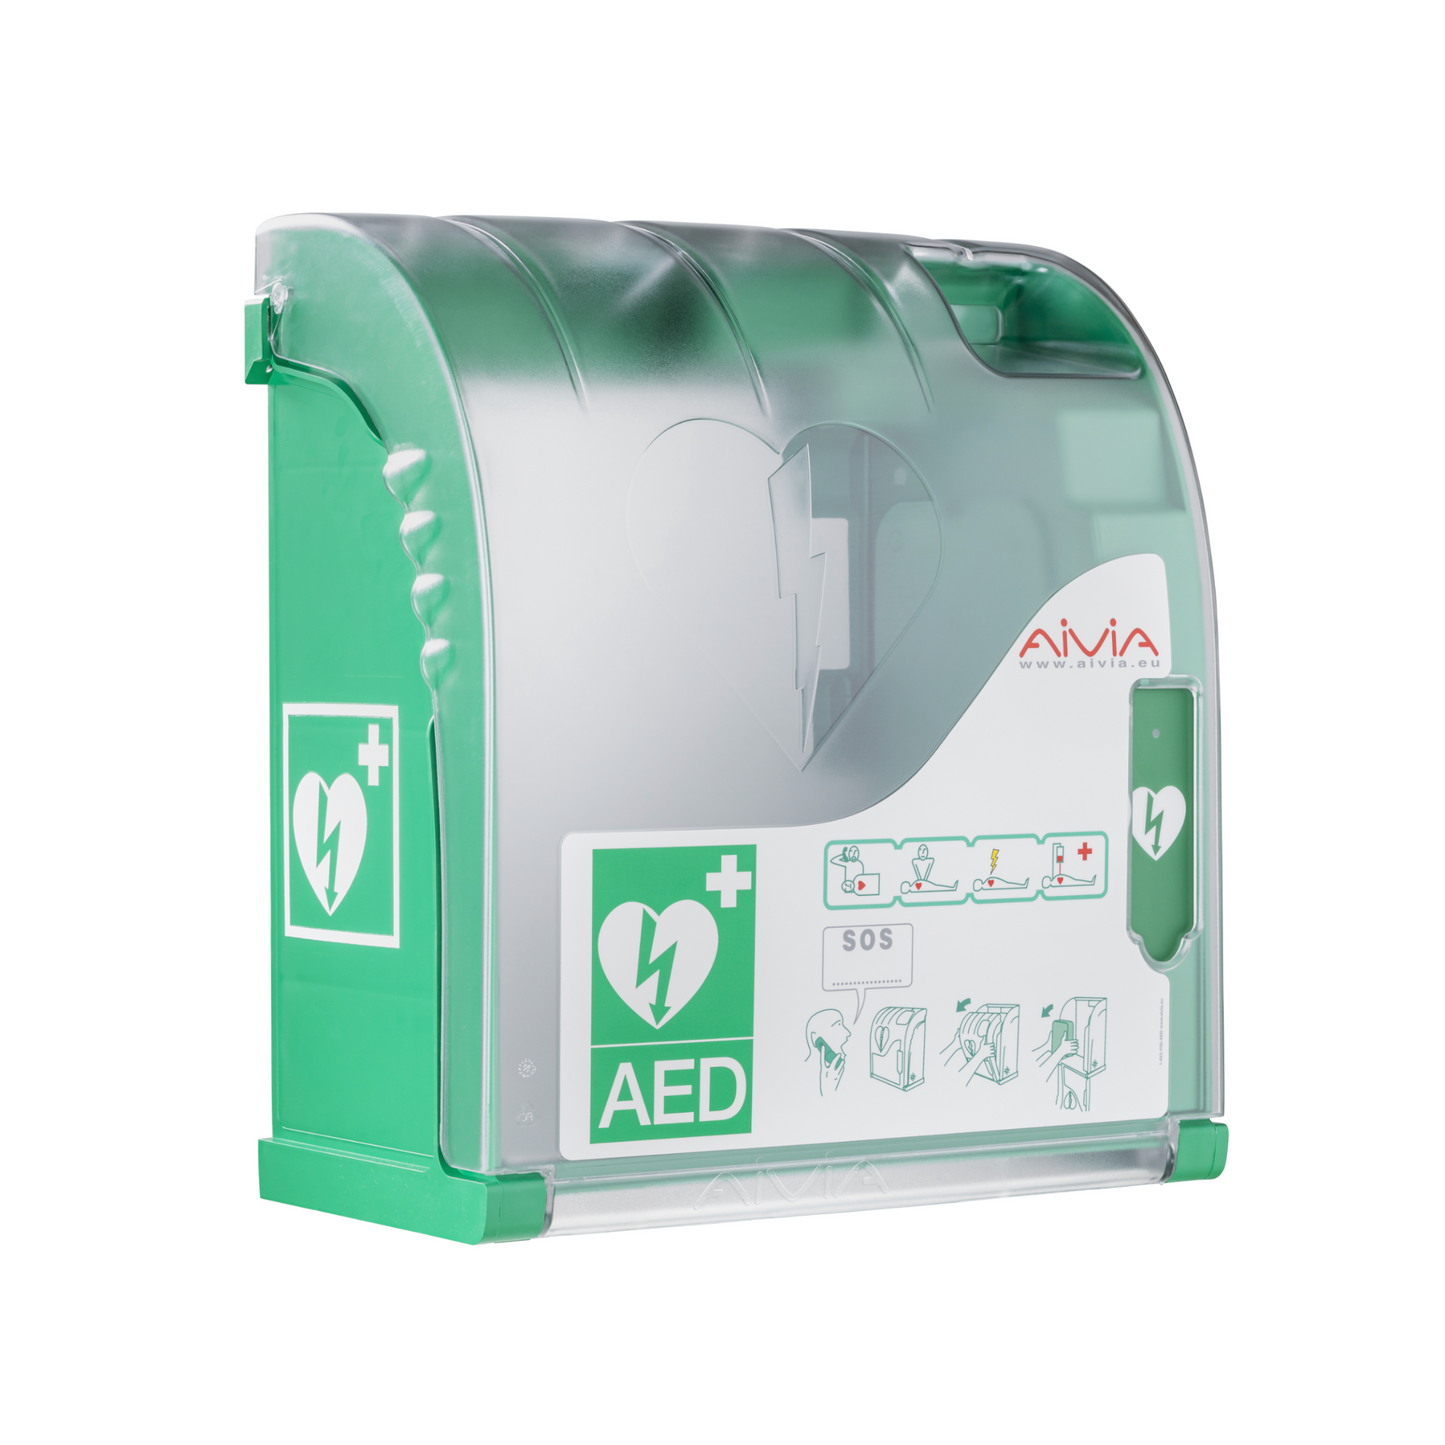 Buitenkast voor AED: Aivia 200 - XX2A200-X101 - ProCardio - XX2A200-X101